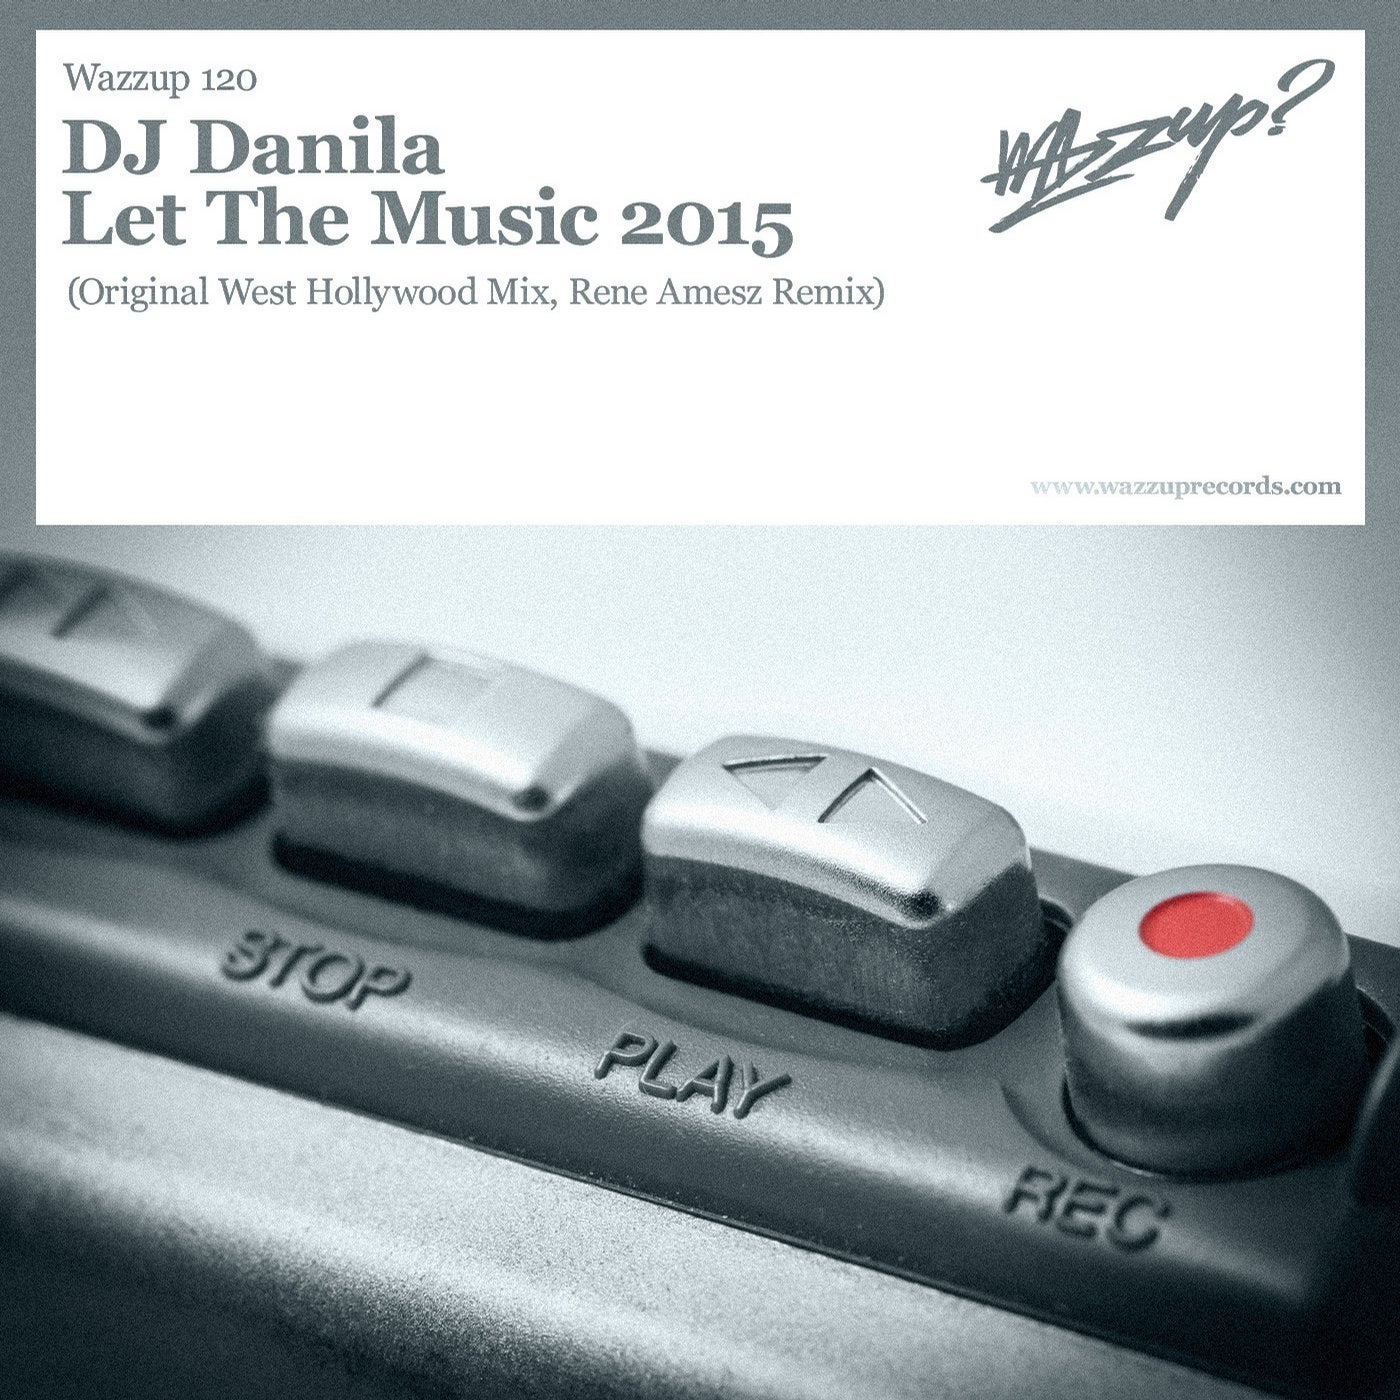 Let the Music 2015